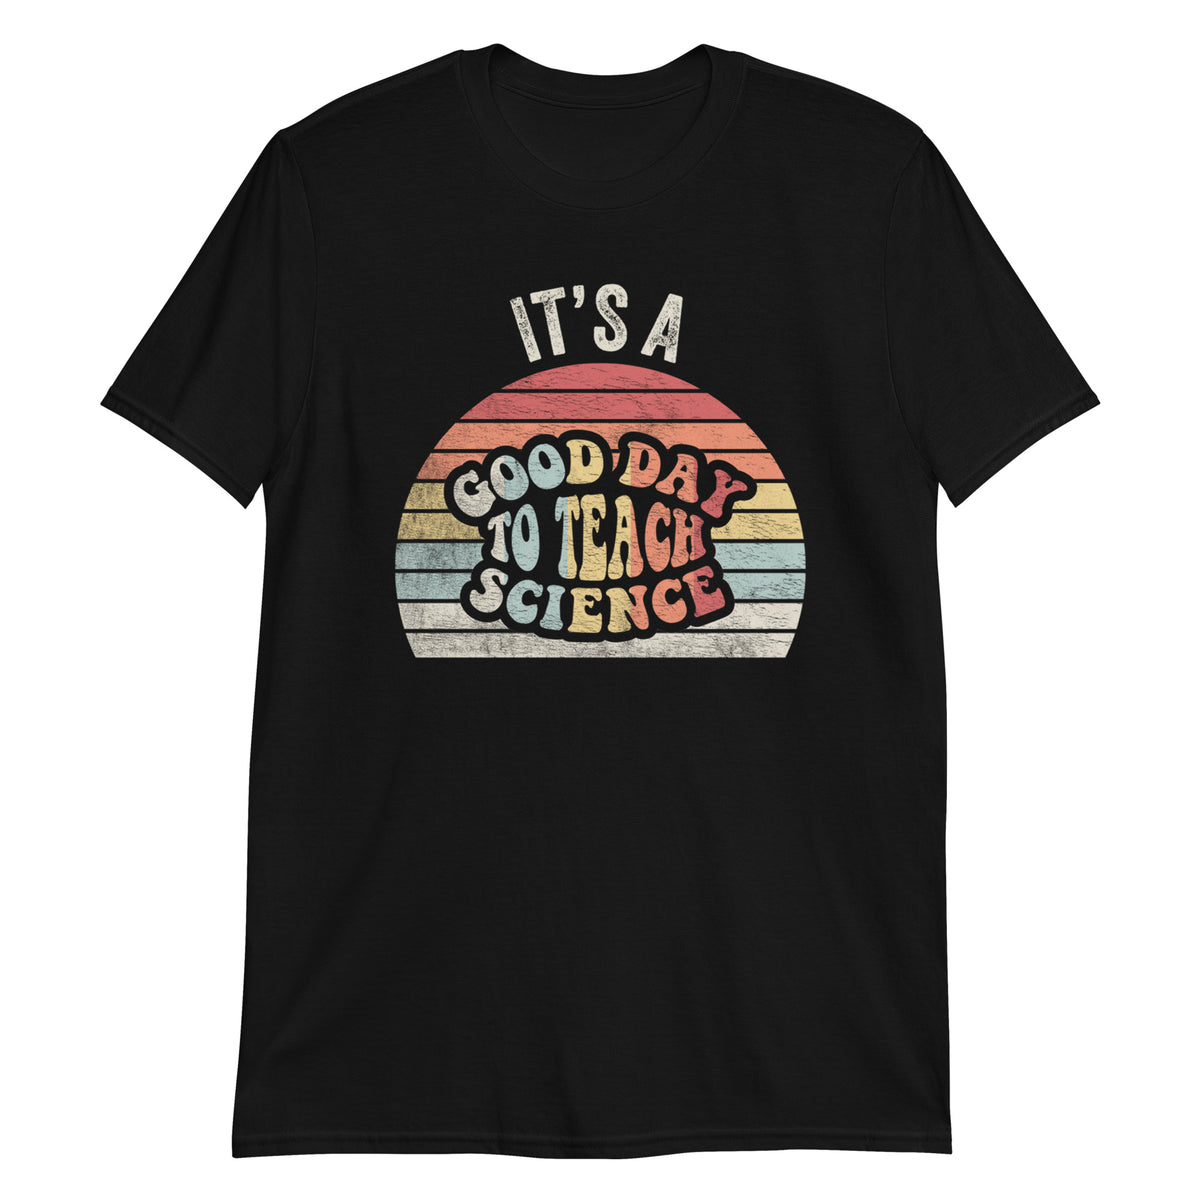 It's a Good Day to Teach Science T-Shirt